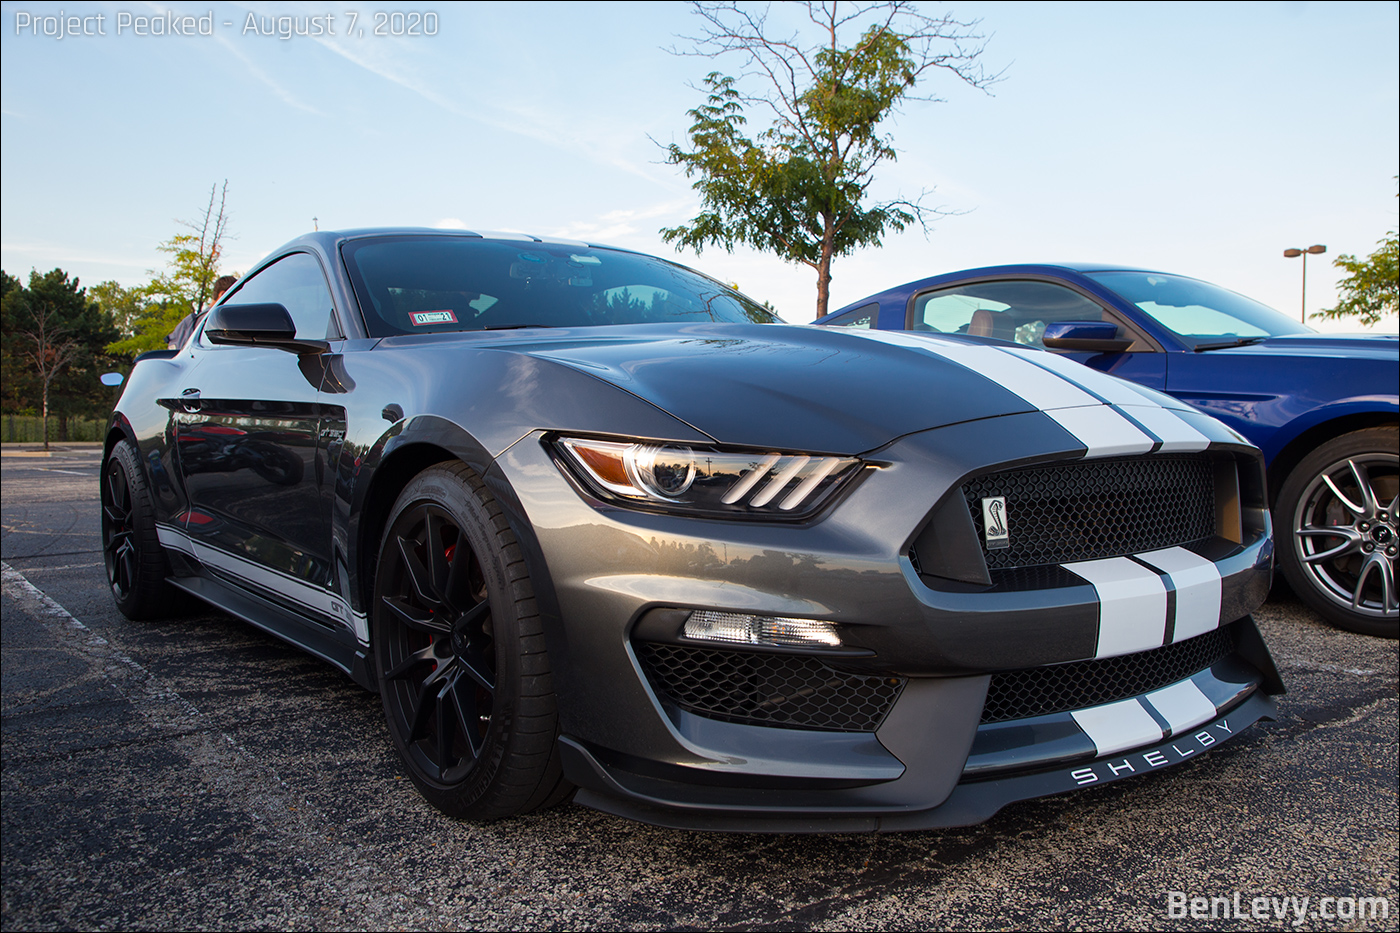 White Stripes on Grey Ford Shelby GT350